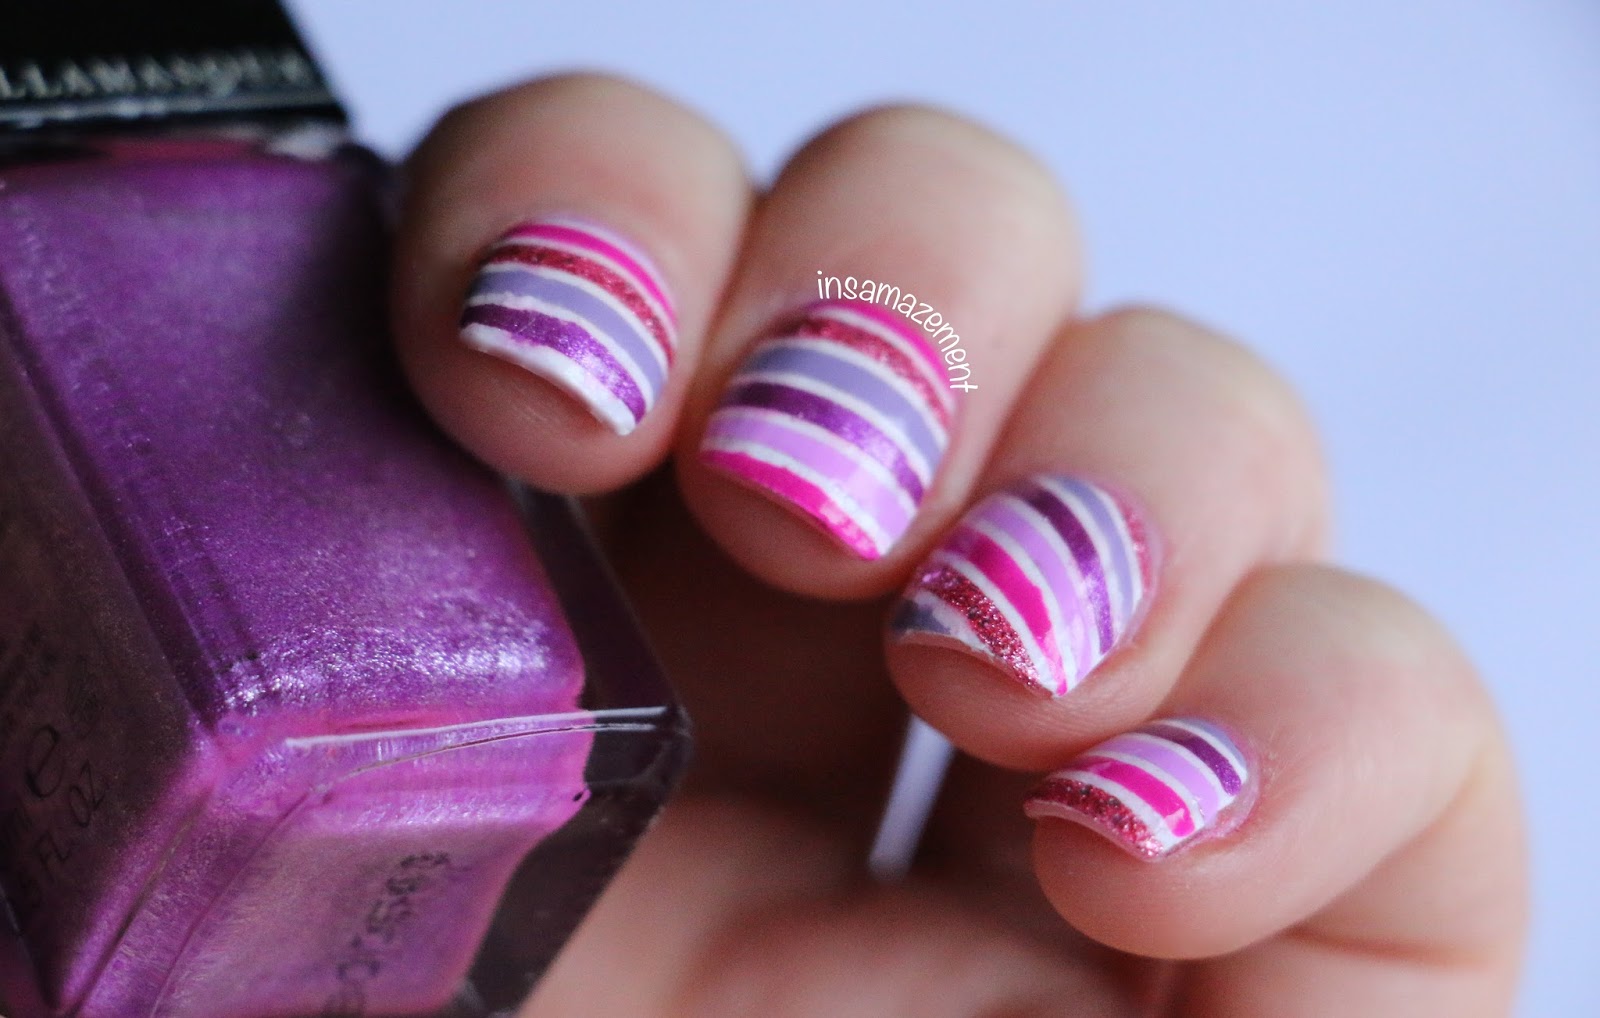 4. How to Create Striped Nail Art with Dental Floss - wide 3